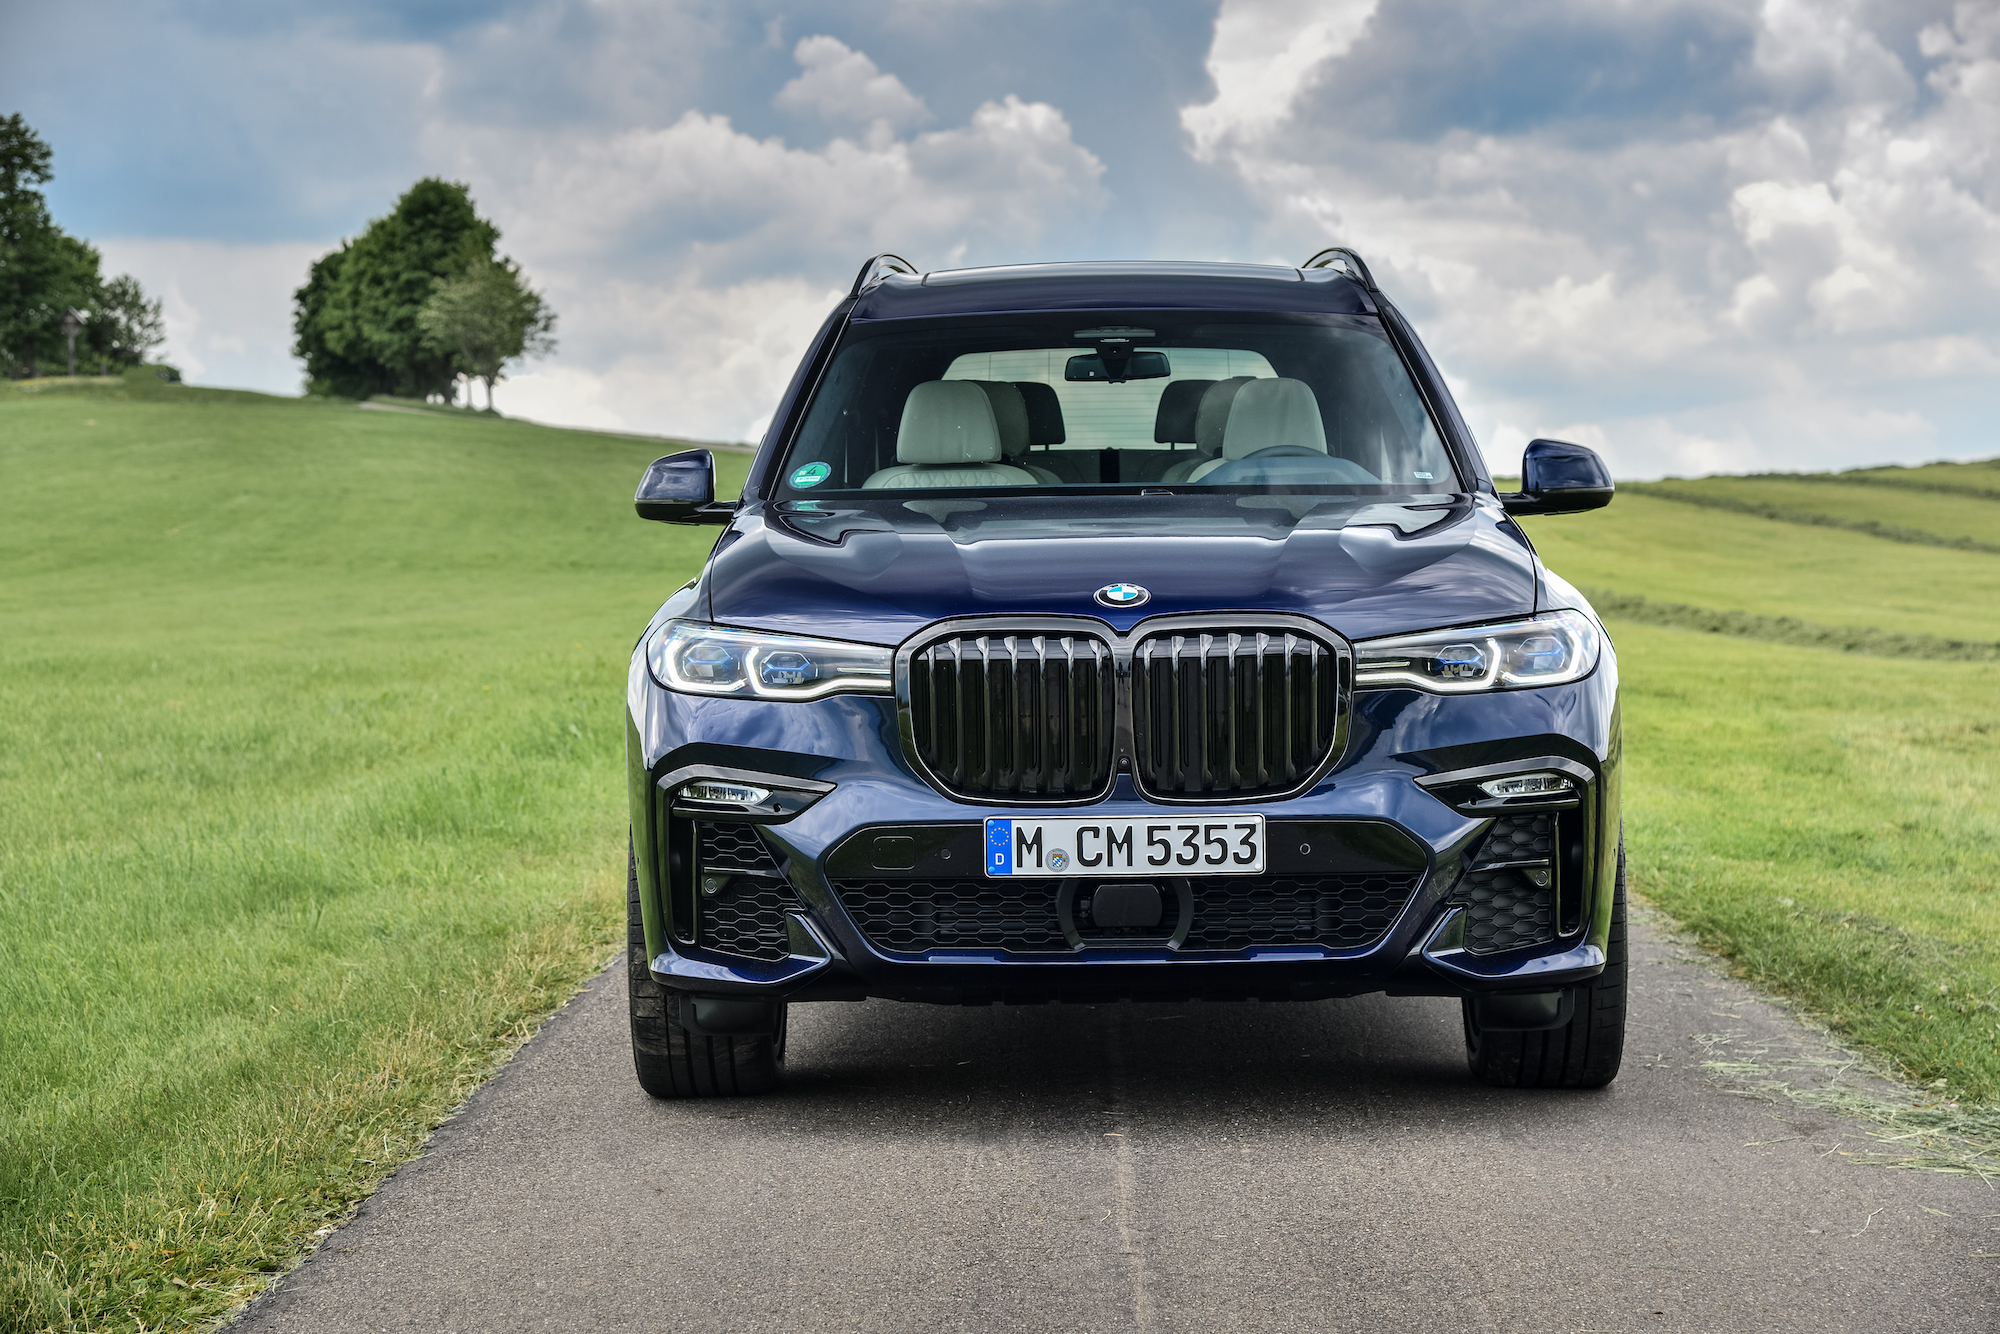 This BMW X7's Engine Is Too Weak to Haul 7 People